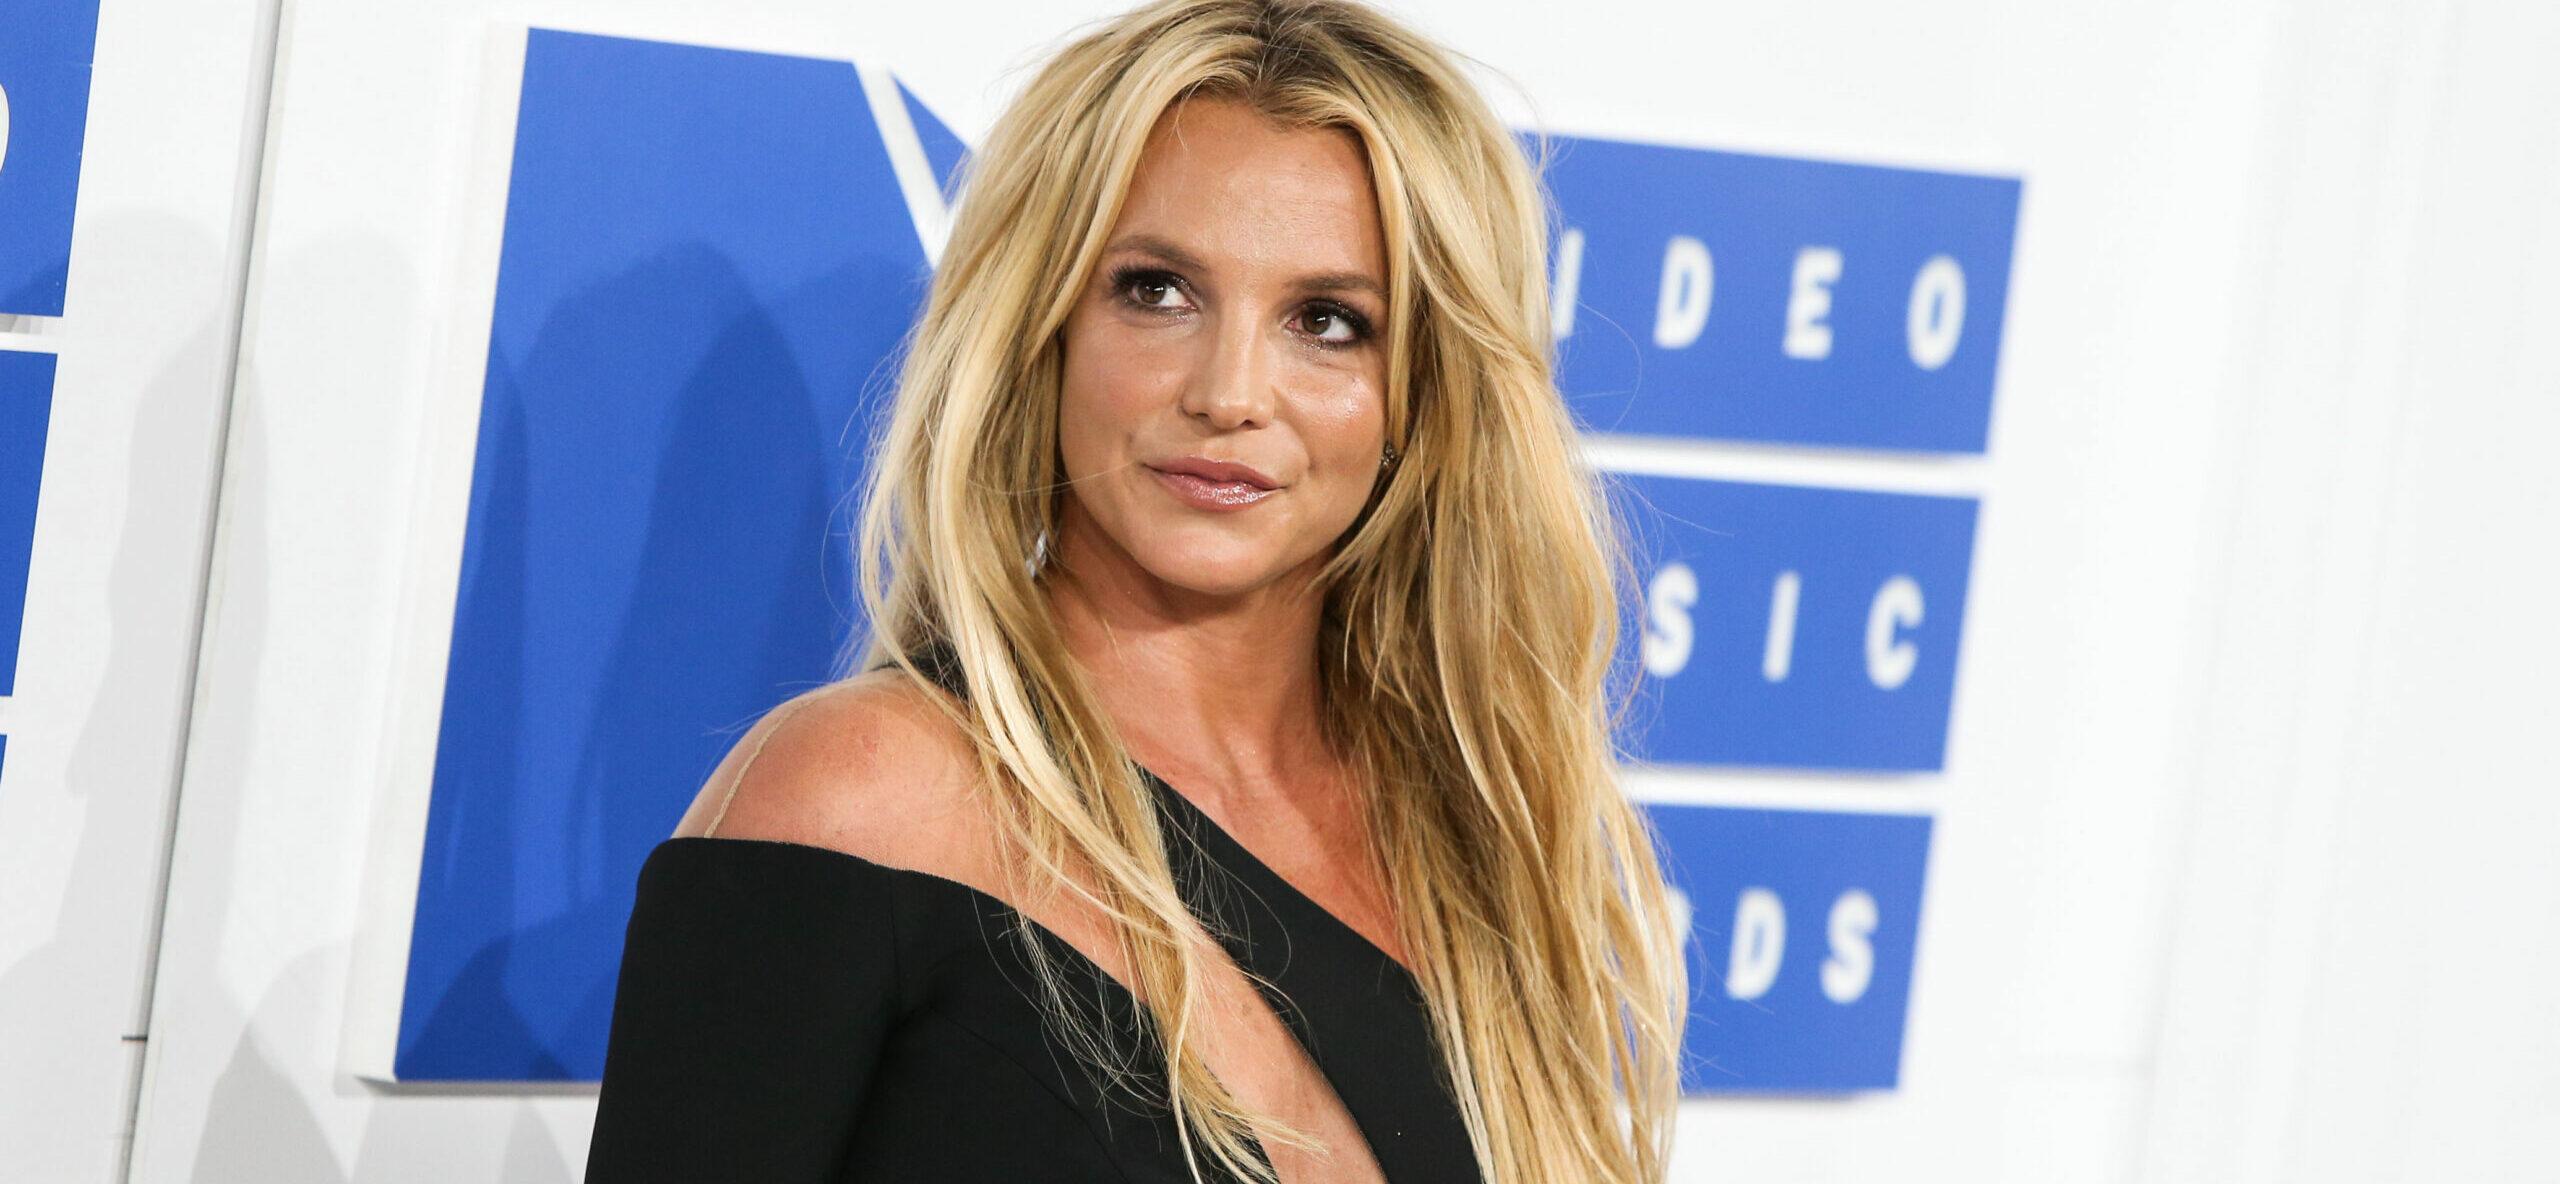 Britney Spears Reveals That She ‘HATED’ Touring: ‘It’s Too Much’